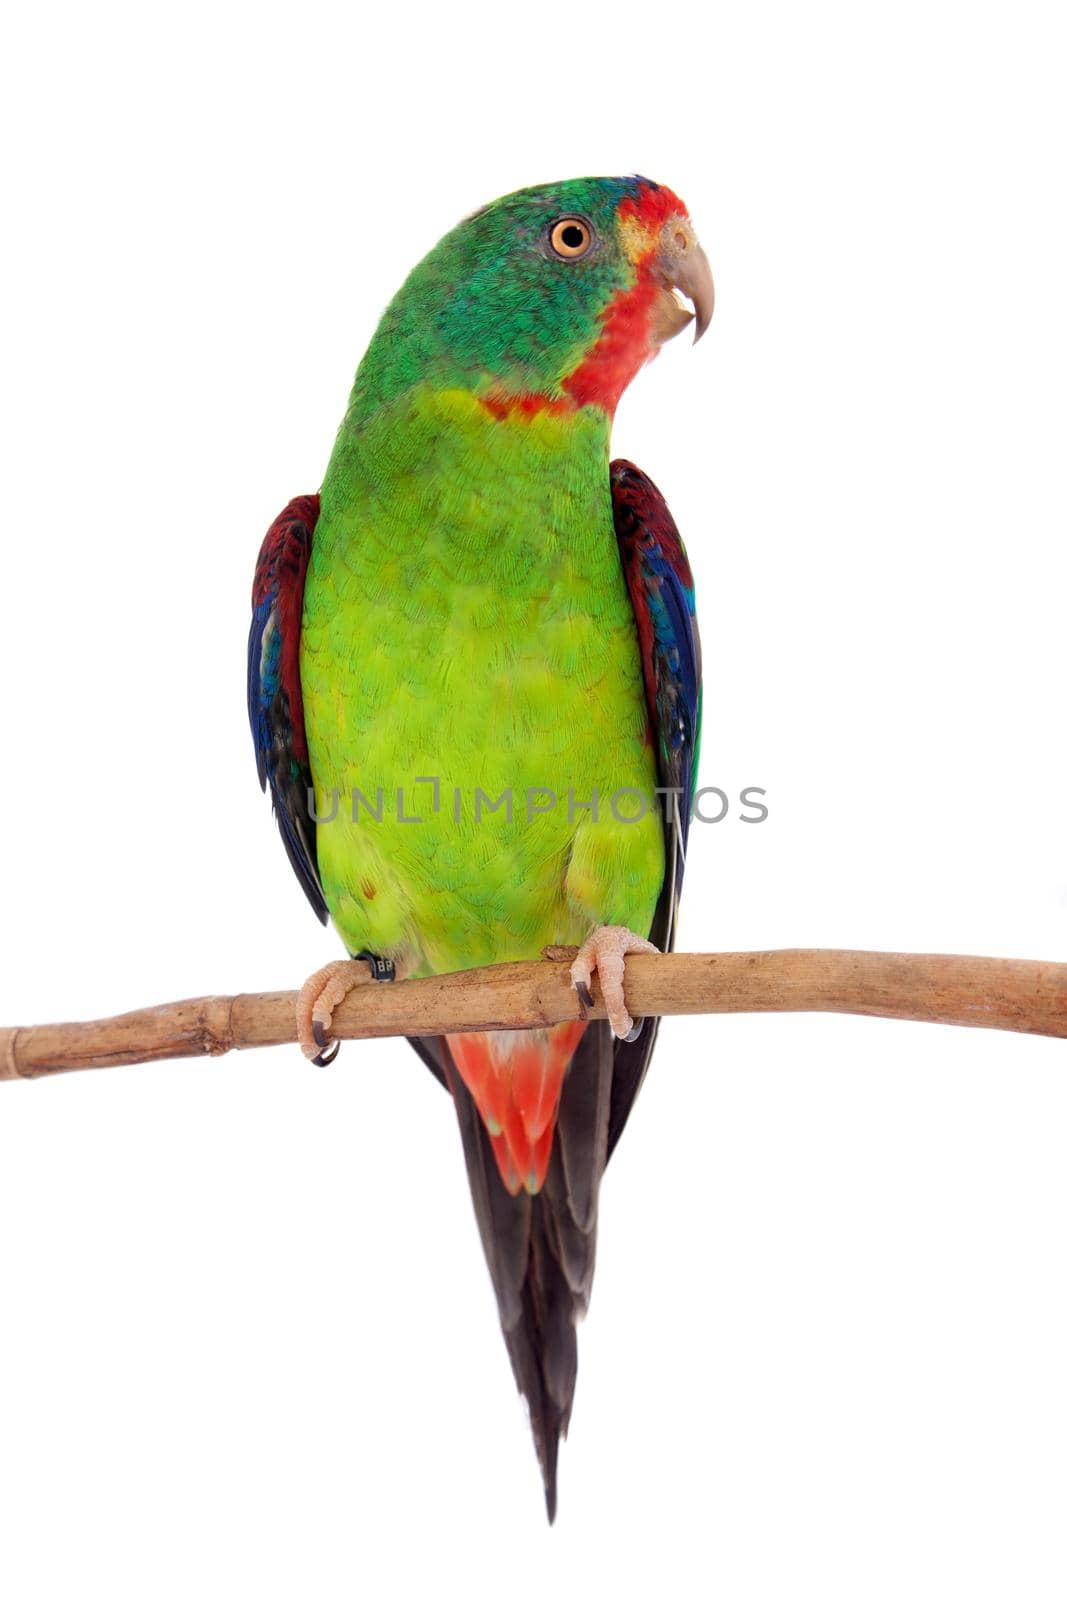 Swift Parrot on white background by RosaJay